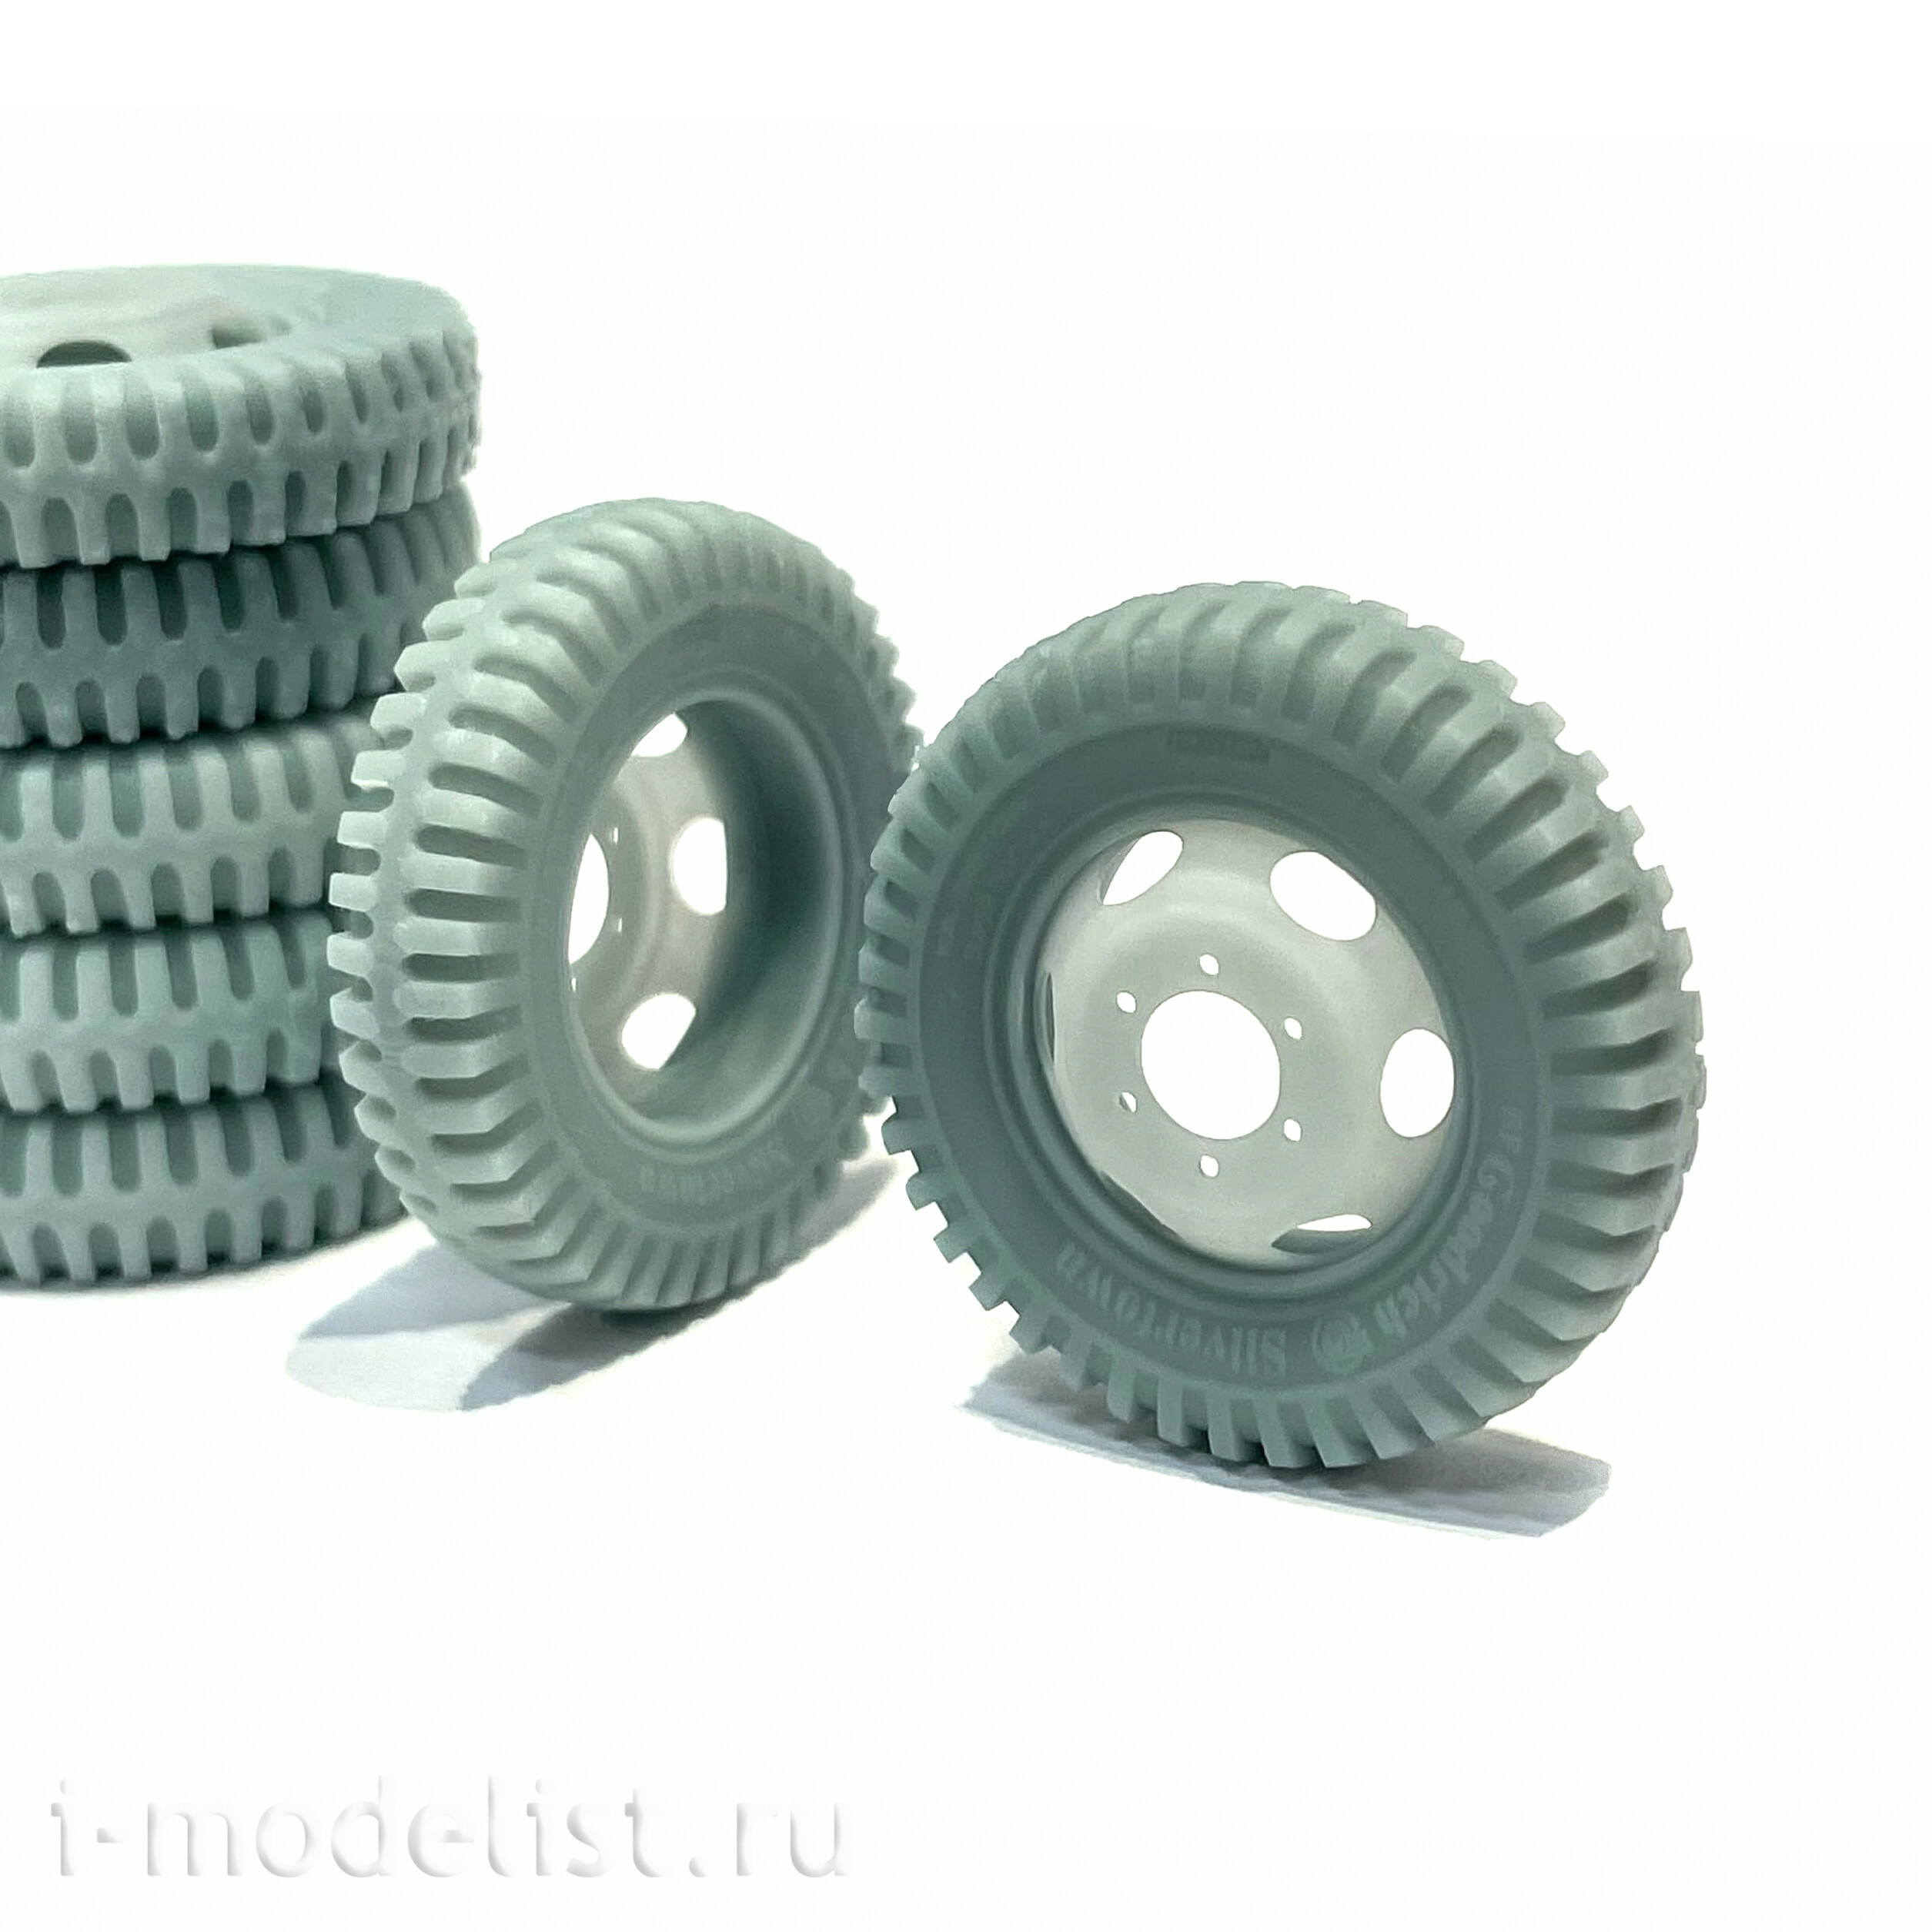 im35099 Imodelist 1/35 Set of wheels for American truck with BF Goodrich tire (10 pieces + 2 spare parts + bolts)